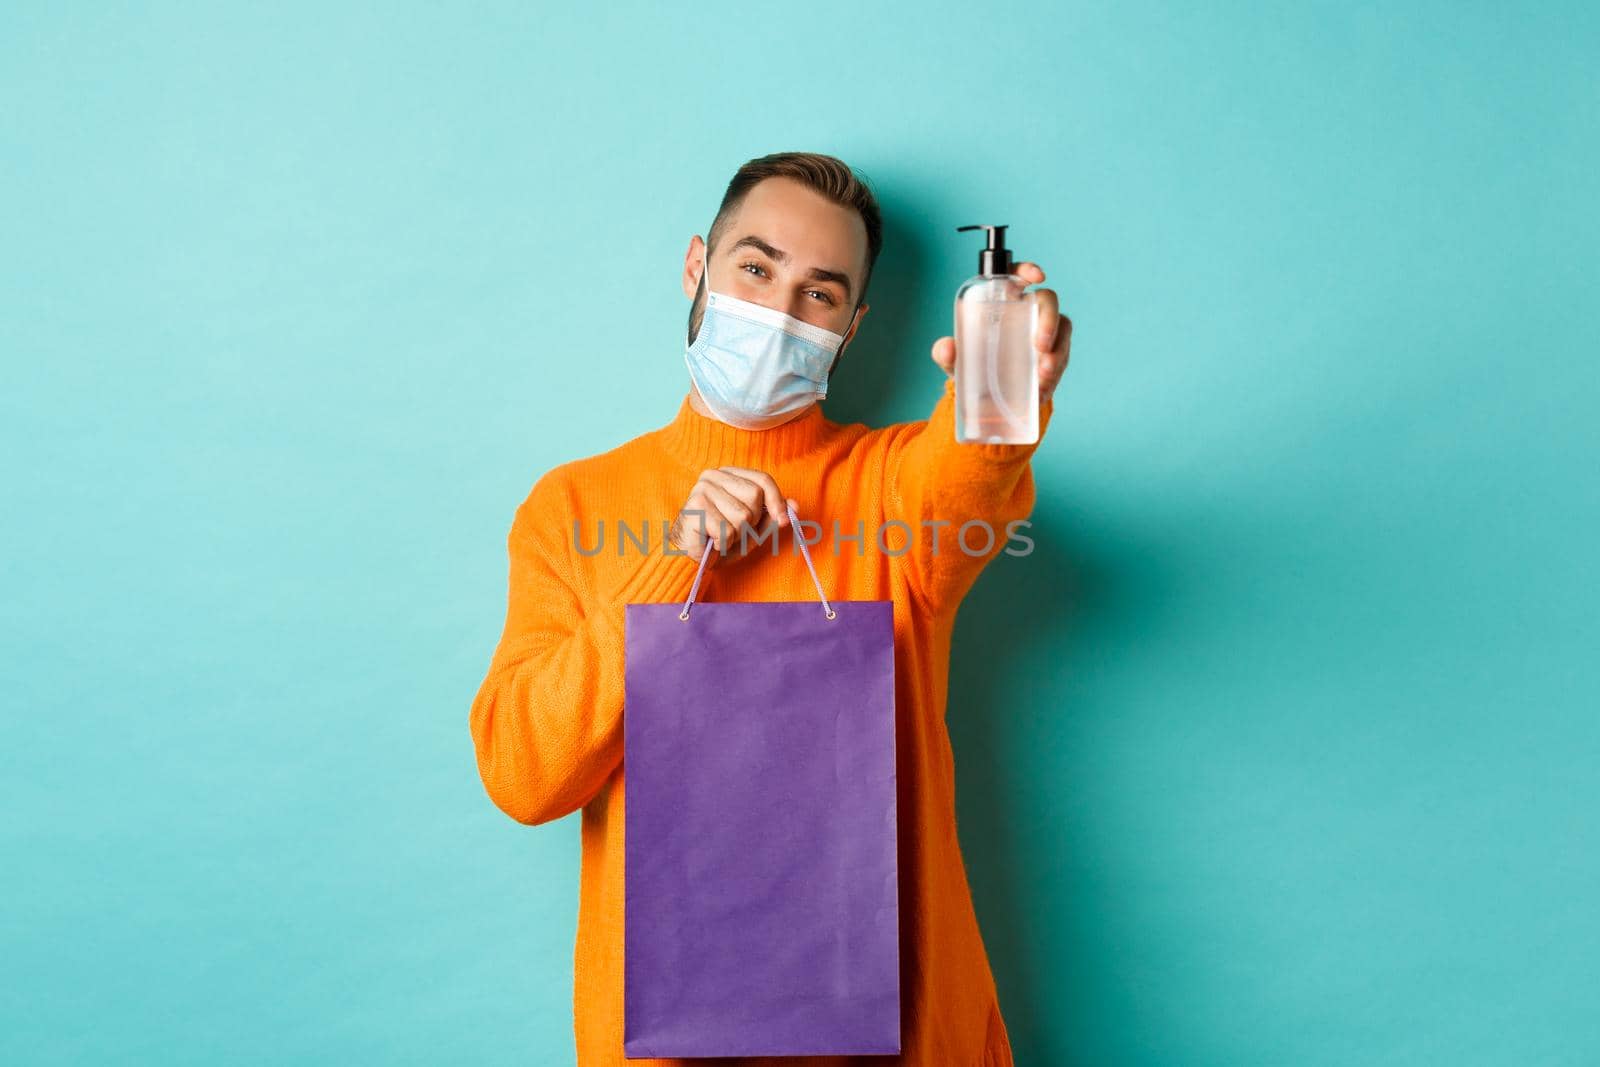 Coronavirus, pandemic and lifestyle concept. Man in face mask showing shopping bag and hand sanitizer, standing over turquoise background.